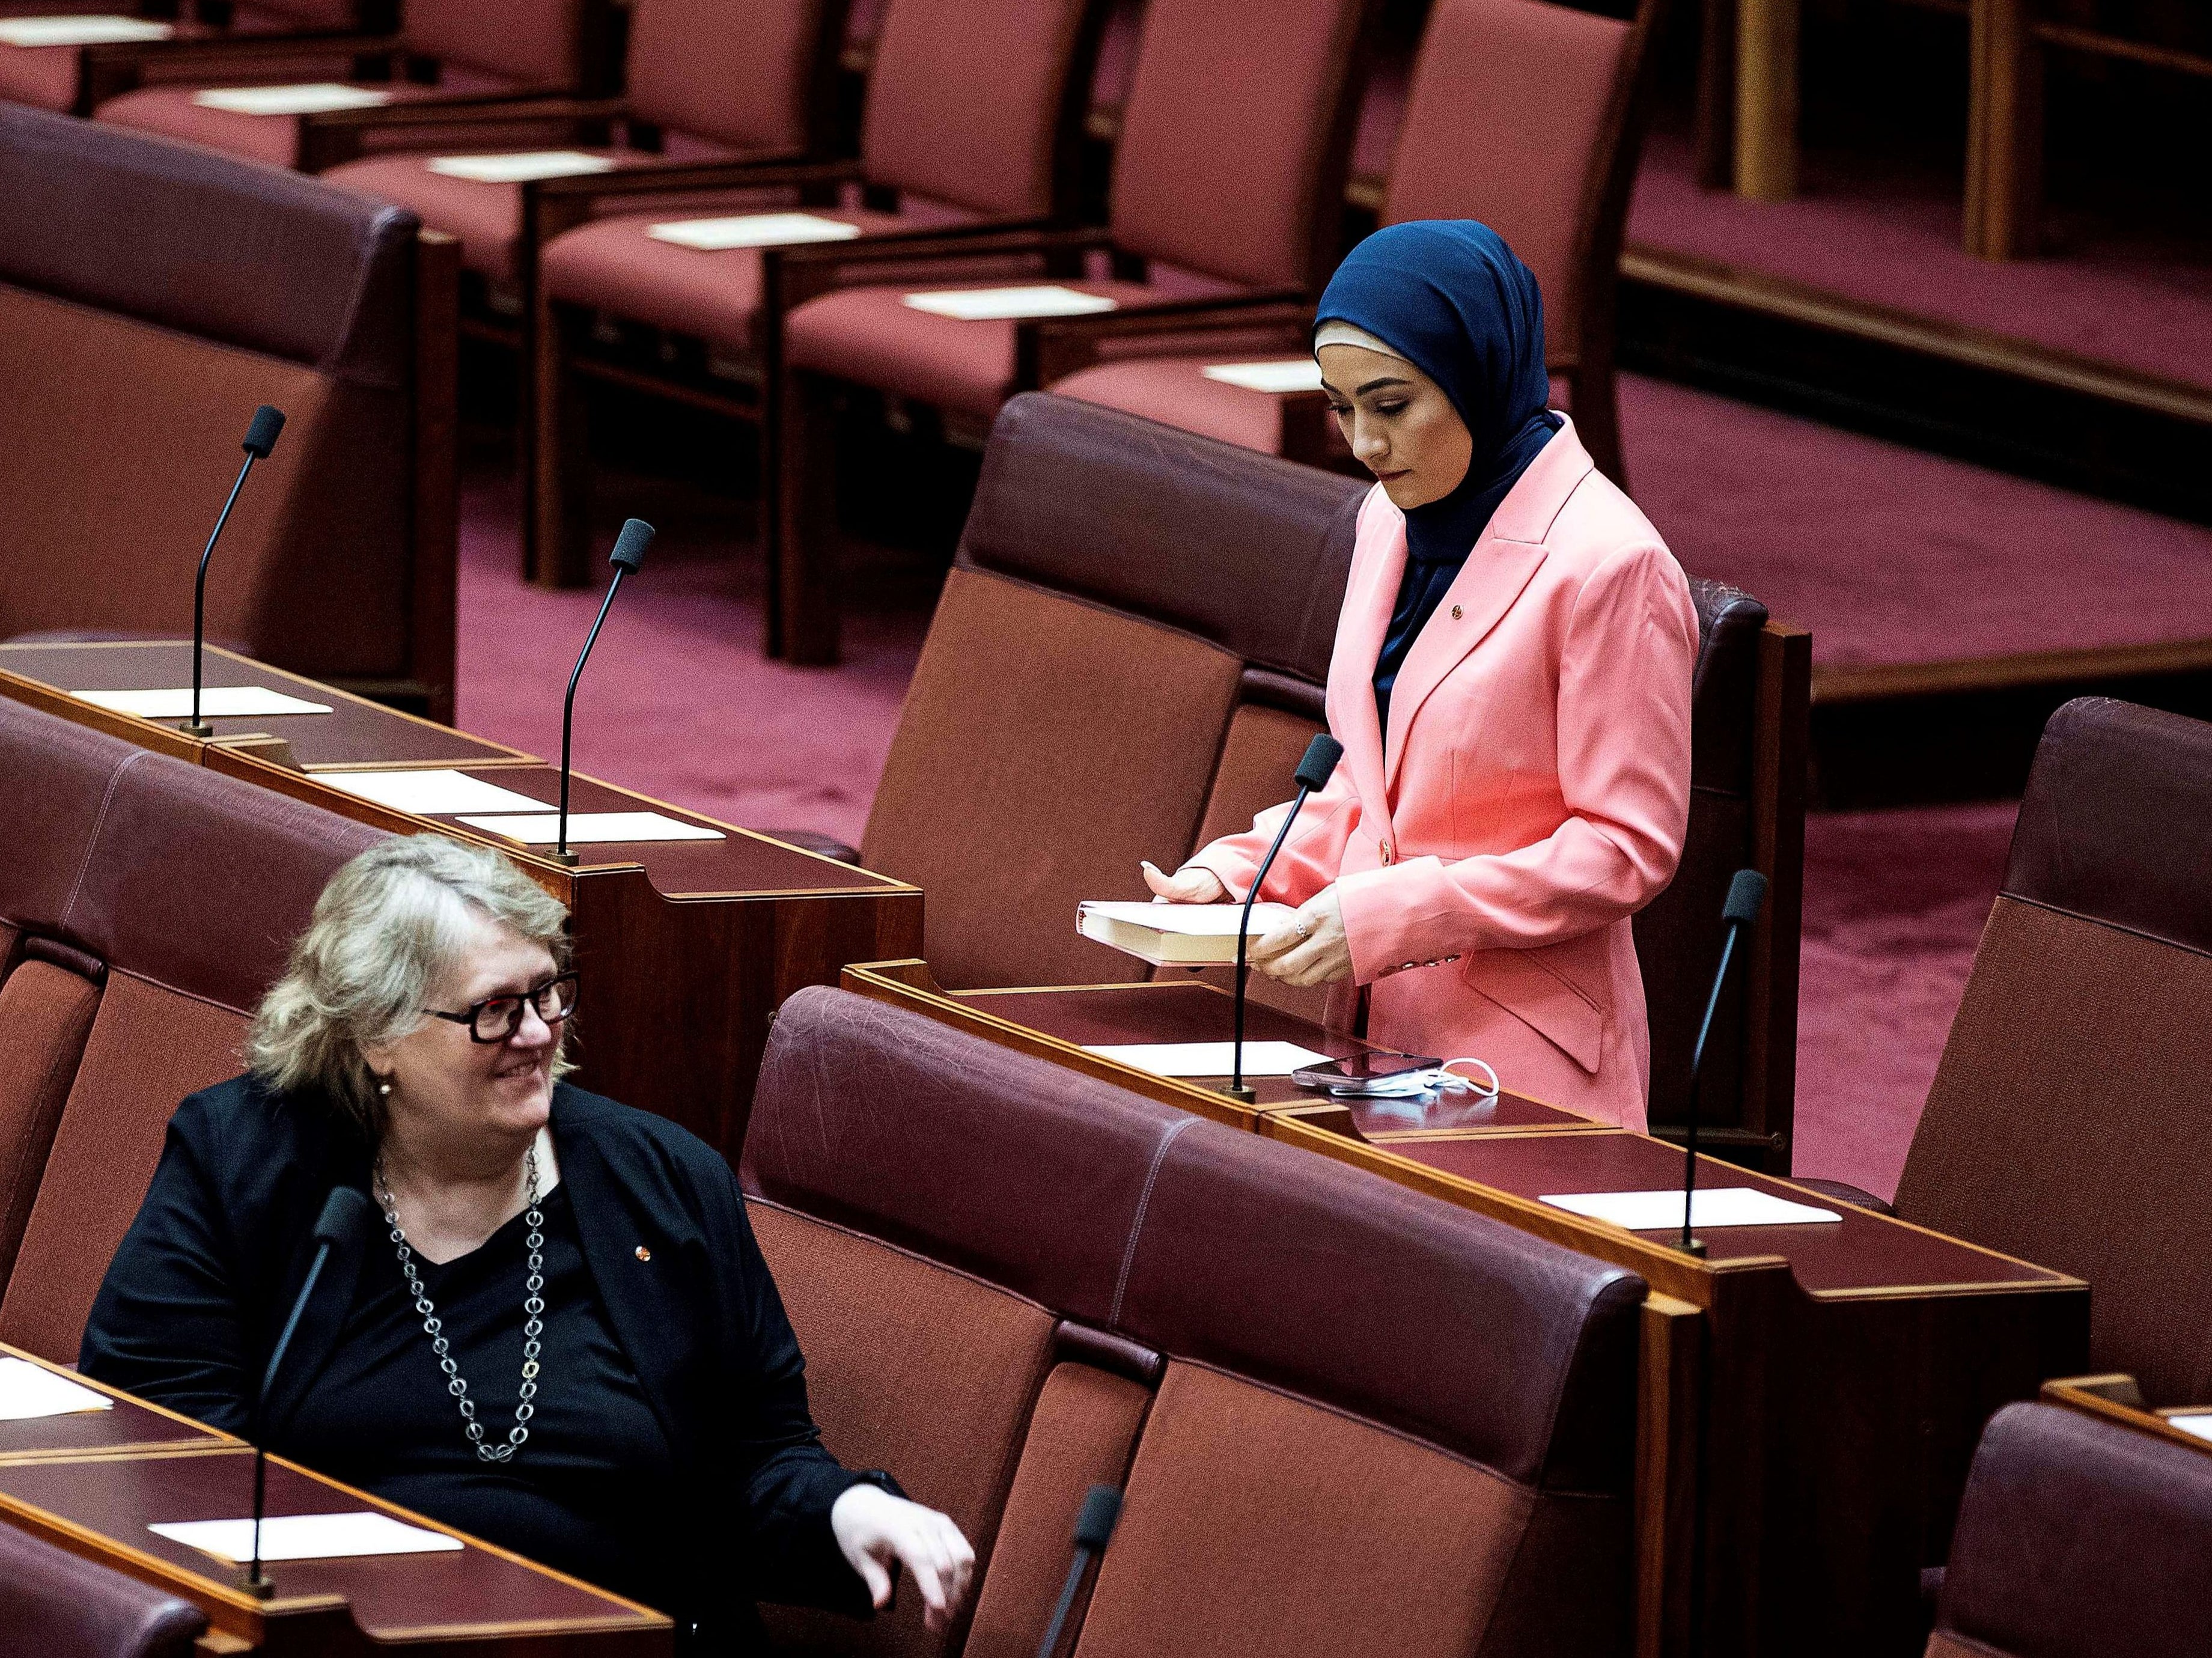 Fatima Payman in the senate during the opening of the 47th parliament on 26 July 2022